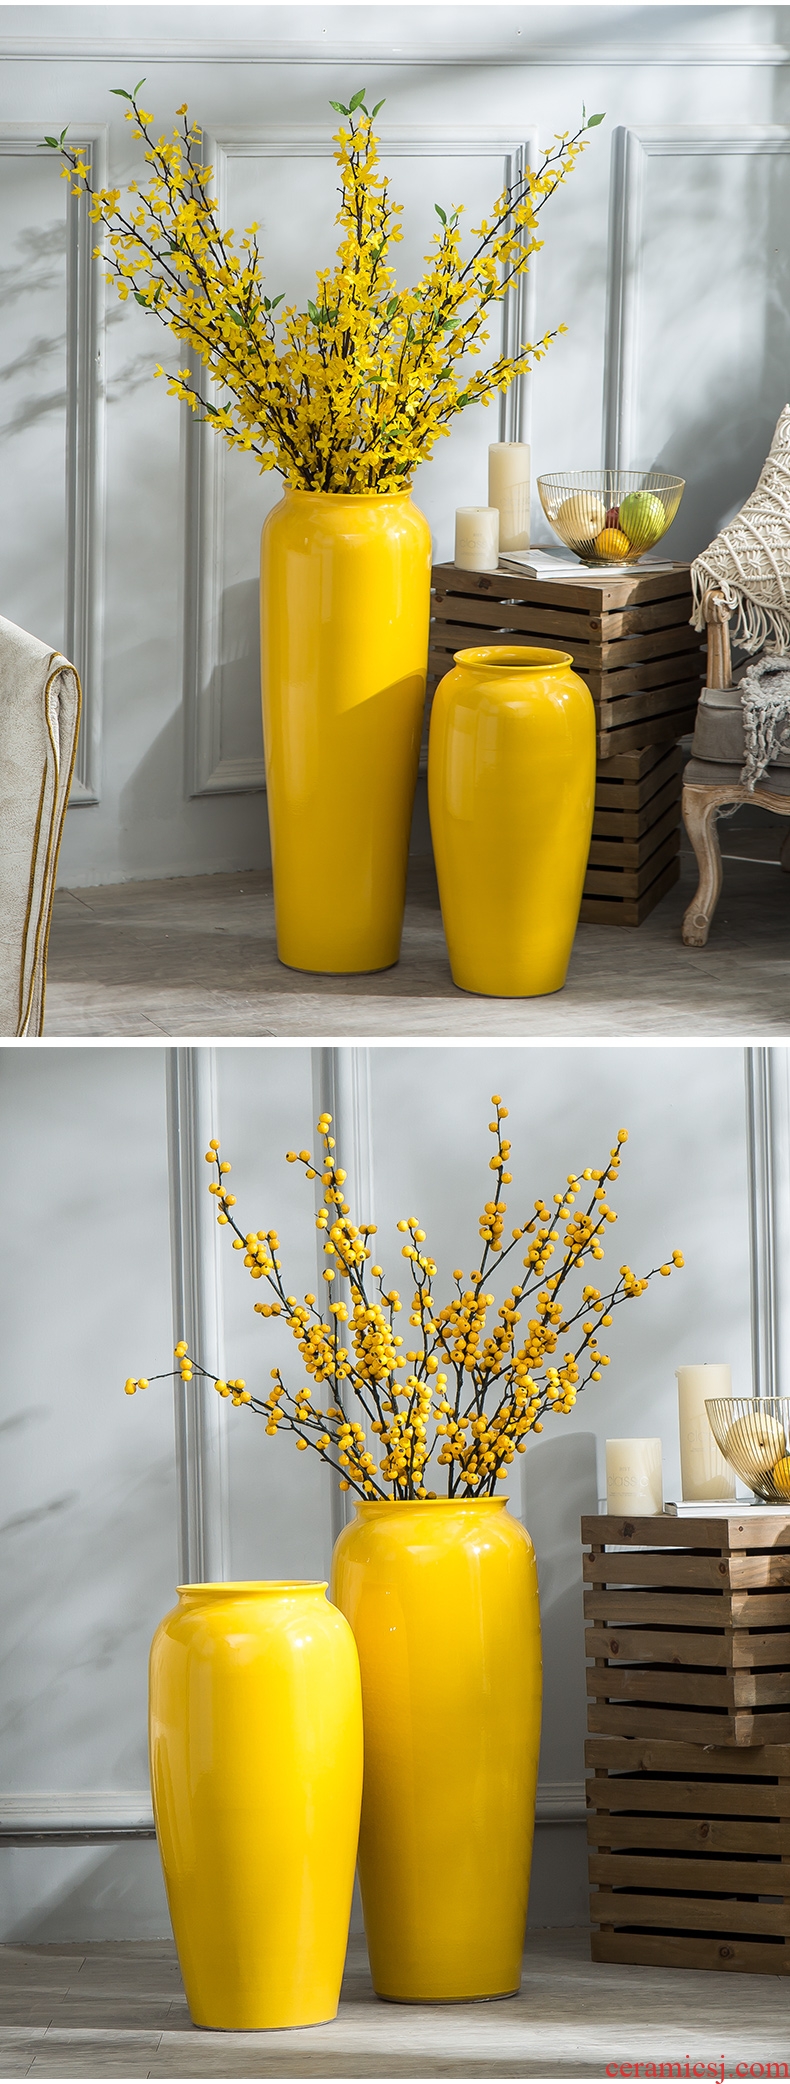 Jingdezhen ceramic vase landing TV ark yellow large dry flower arranging contemporary and contracted sitting room adornment furnishing articles